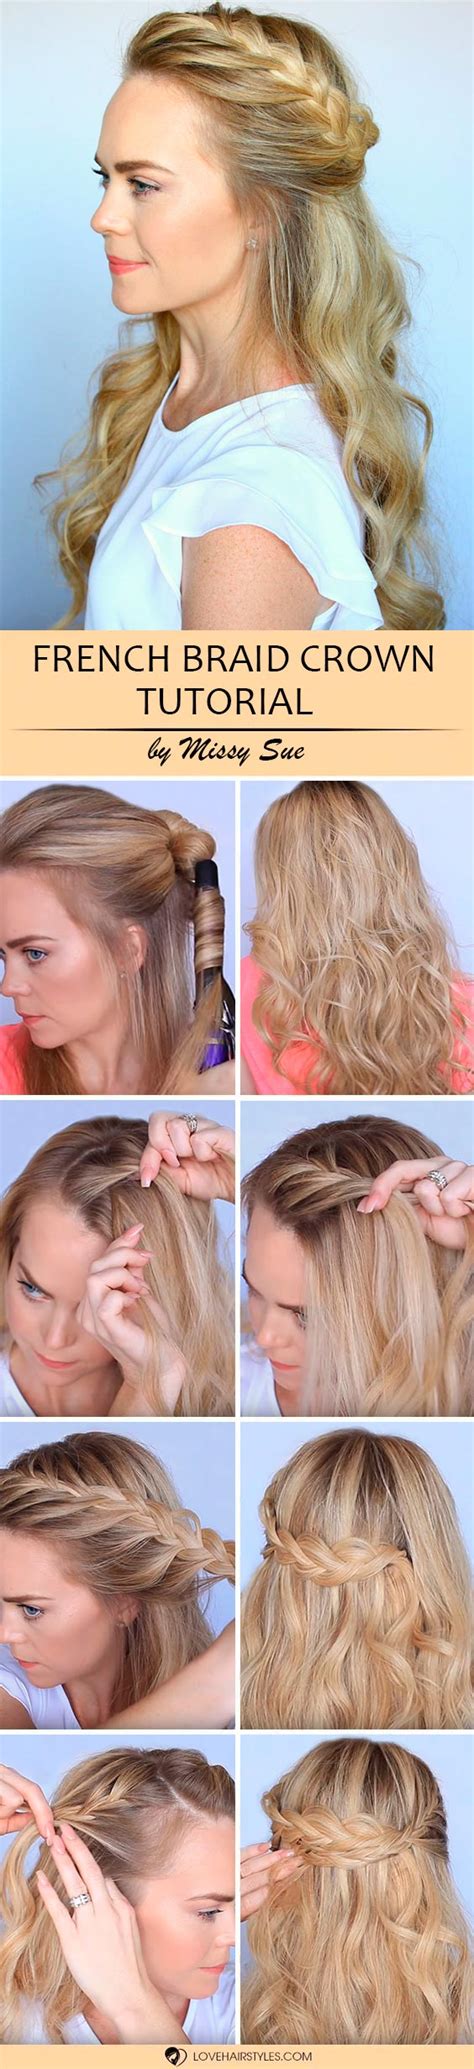 As practical and pretty as this type of hairstyle can be, it's not always easy to braid your own hair. 26 Simple Tutorials To Braid Your Own Hair Perfectly | LoveHairStyles.com